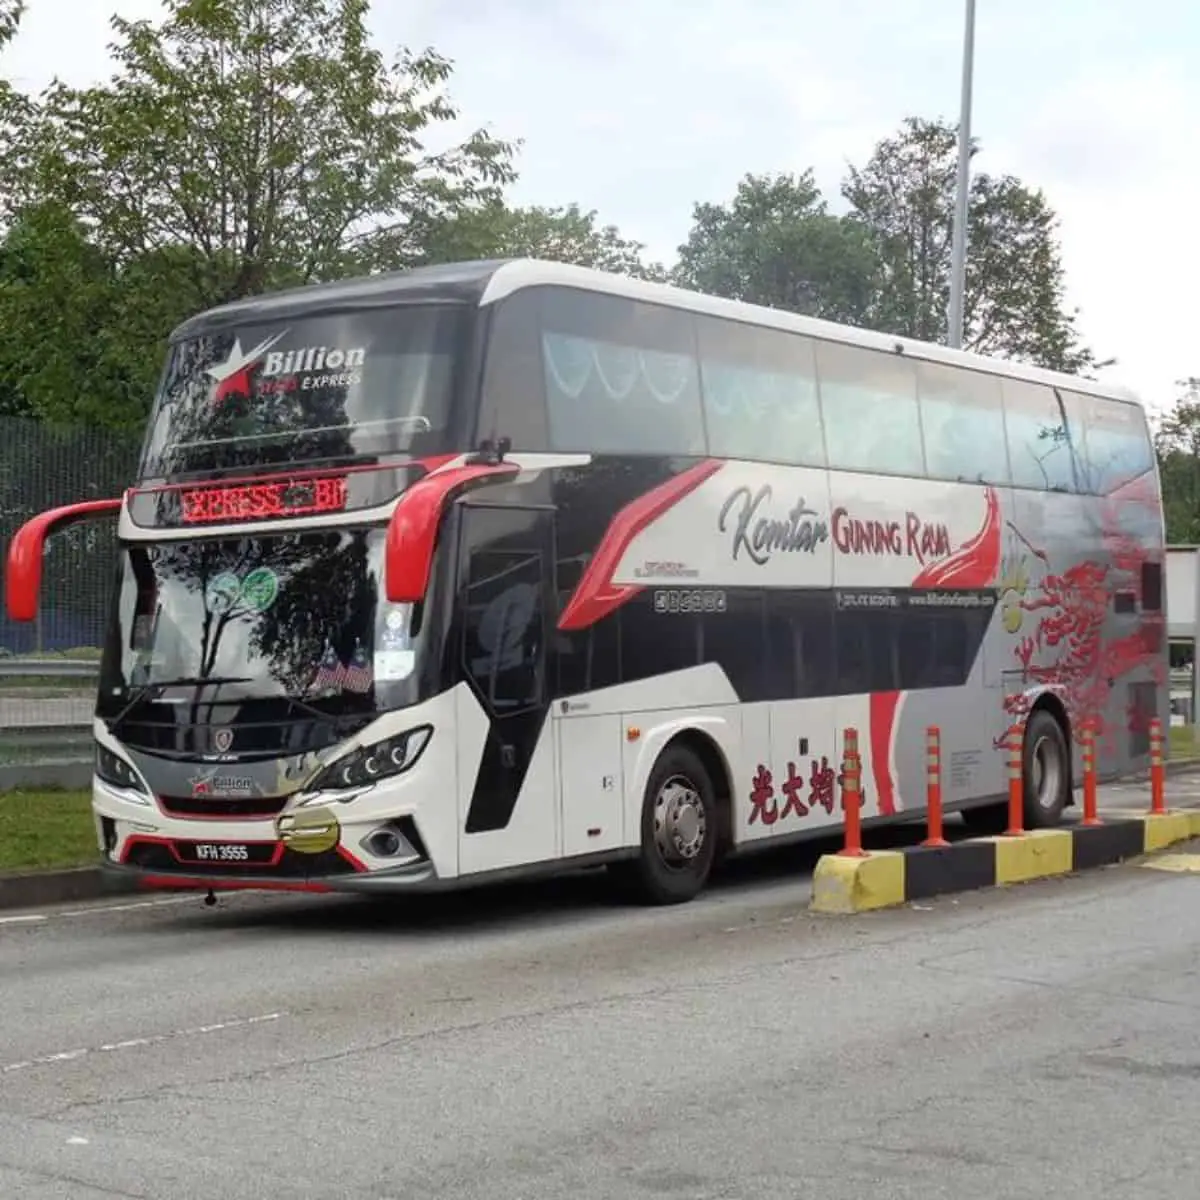 Billion Stars Express bus in red colour